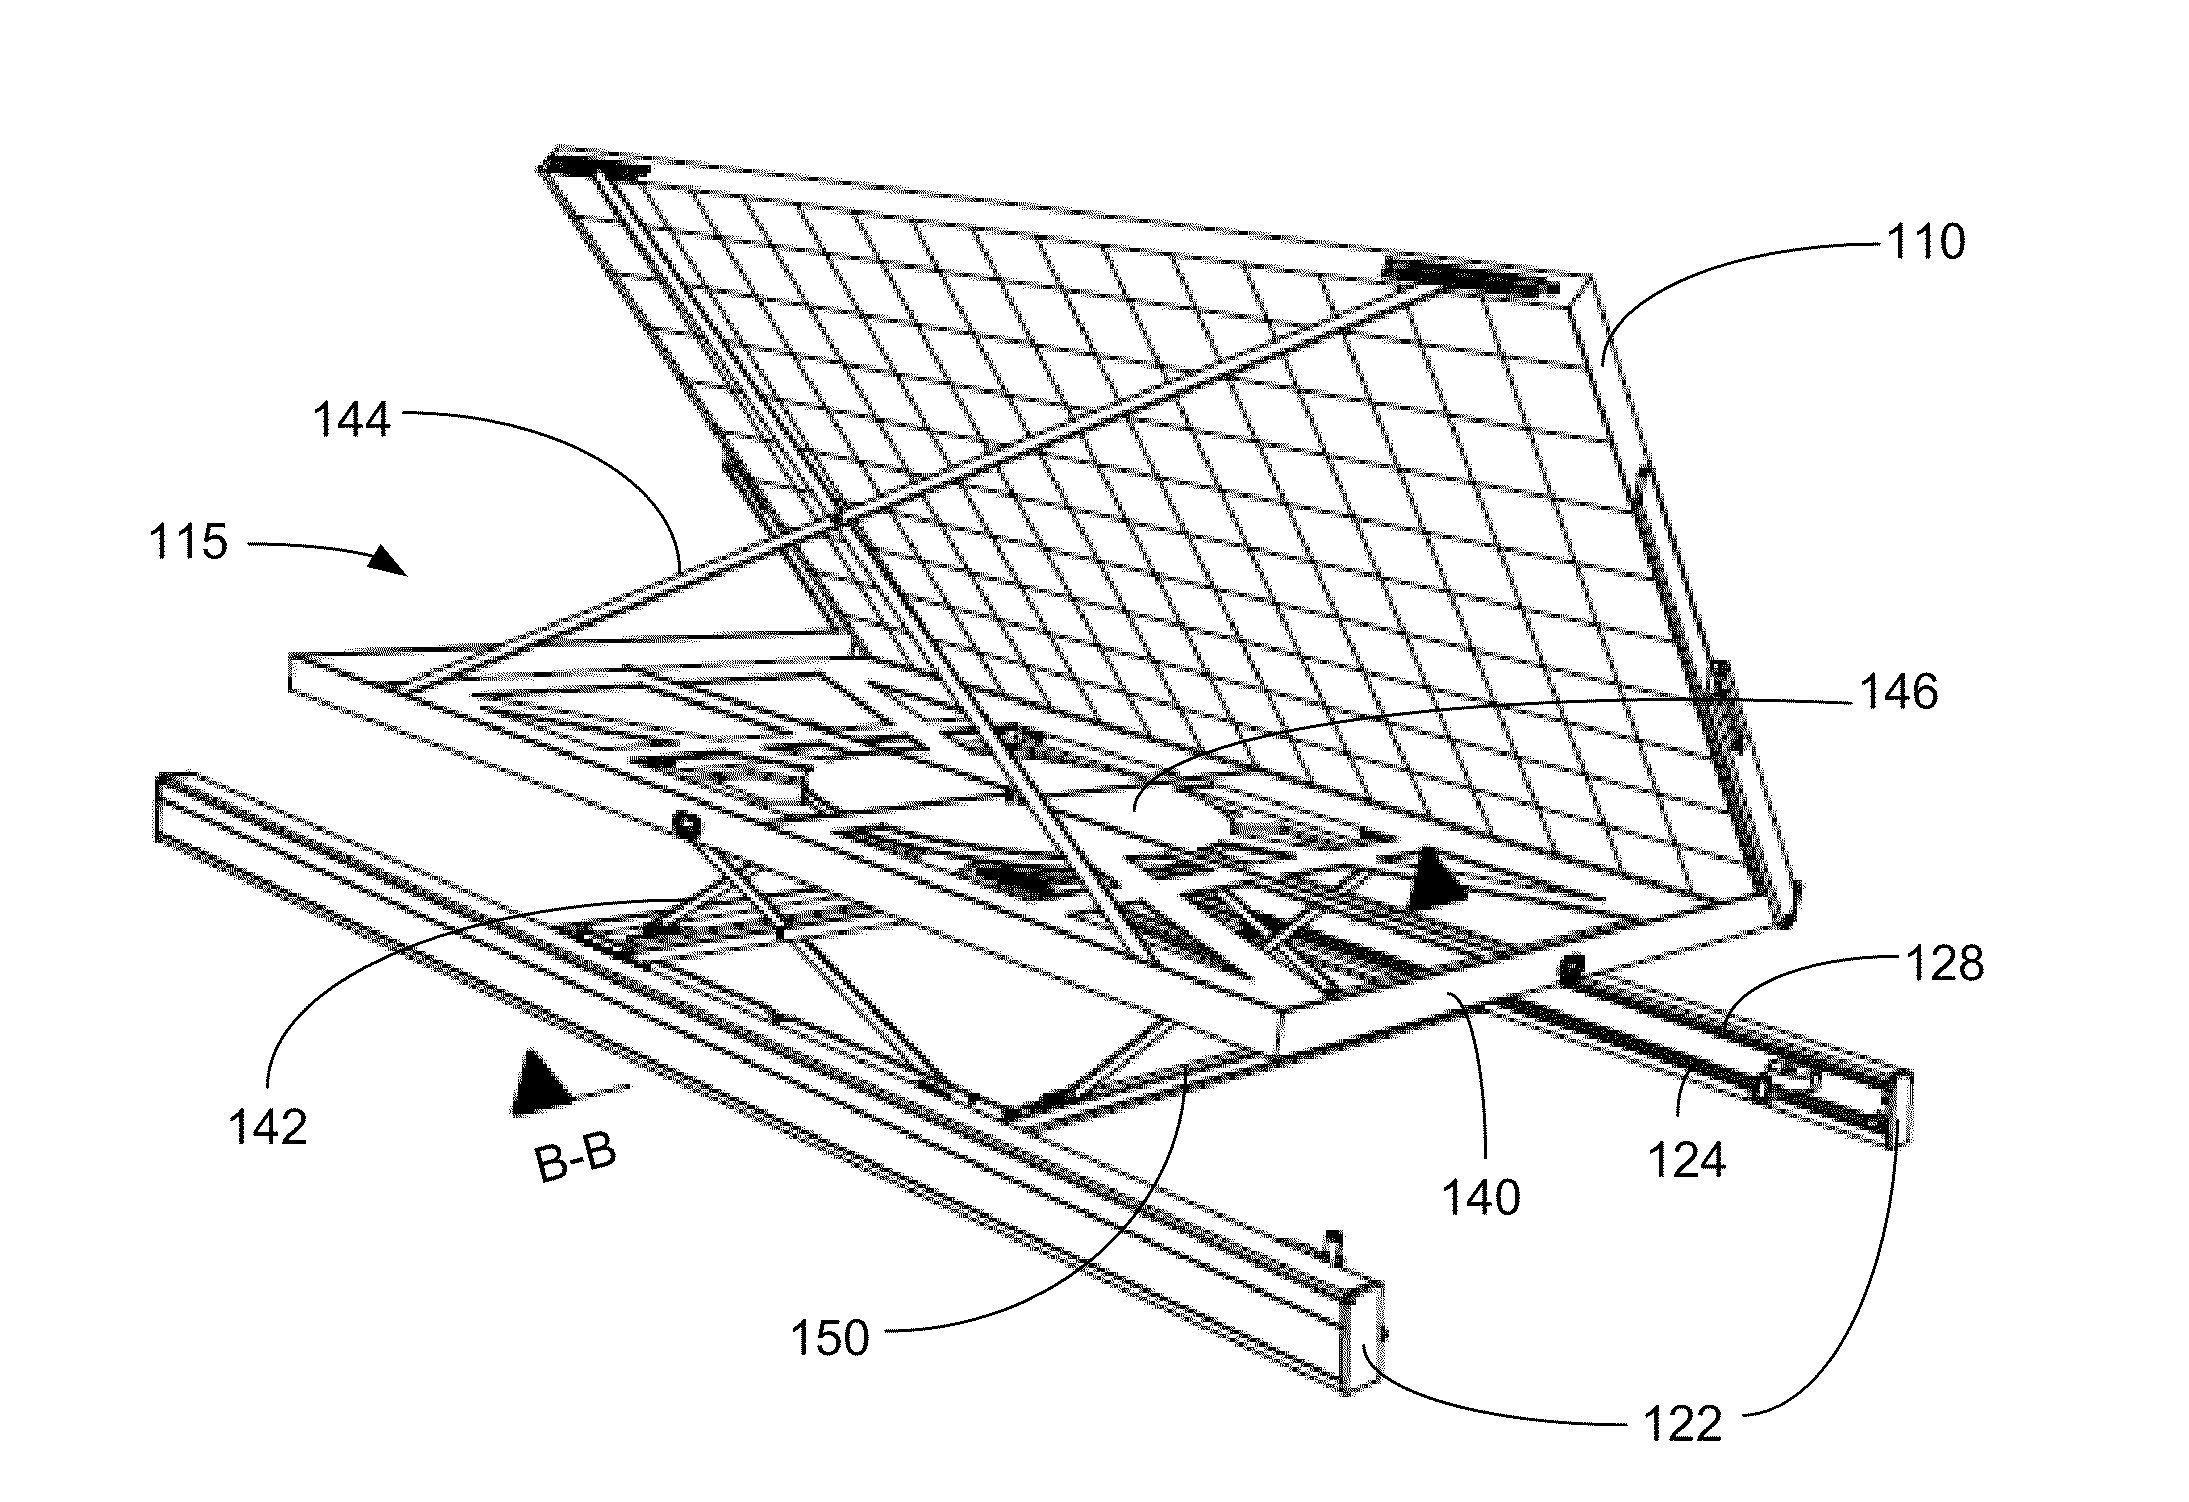 Solar collector support system for efficient storage, transport, and deployment of an expandable array of rotatable solar collectors